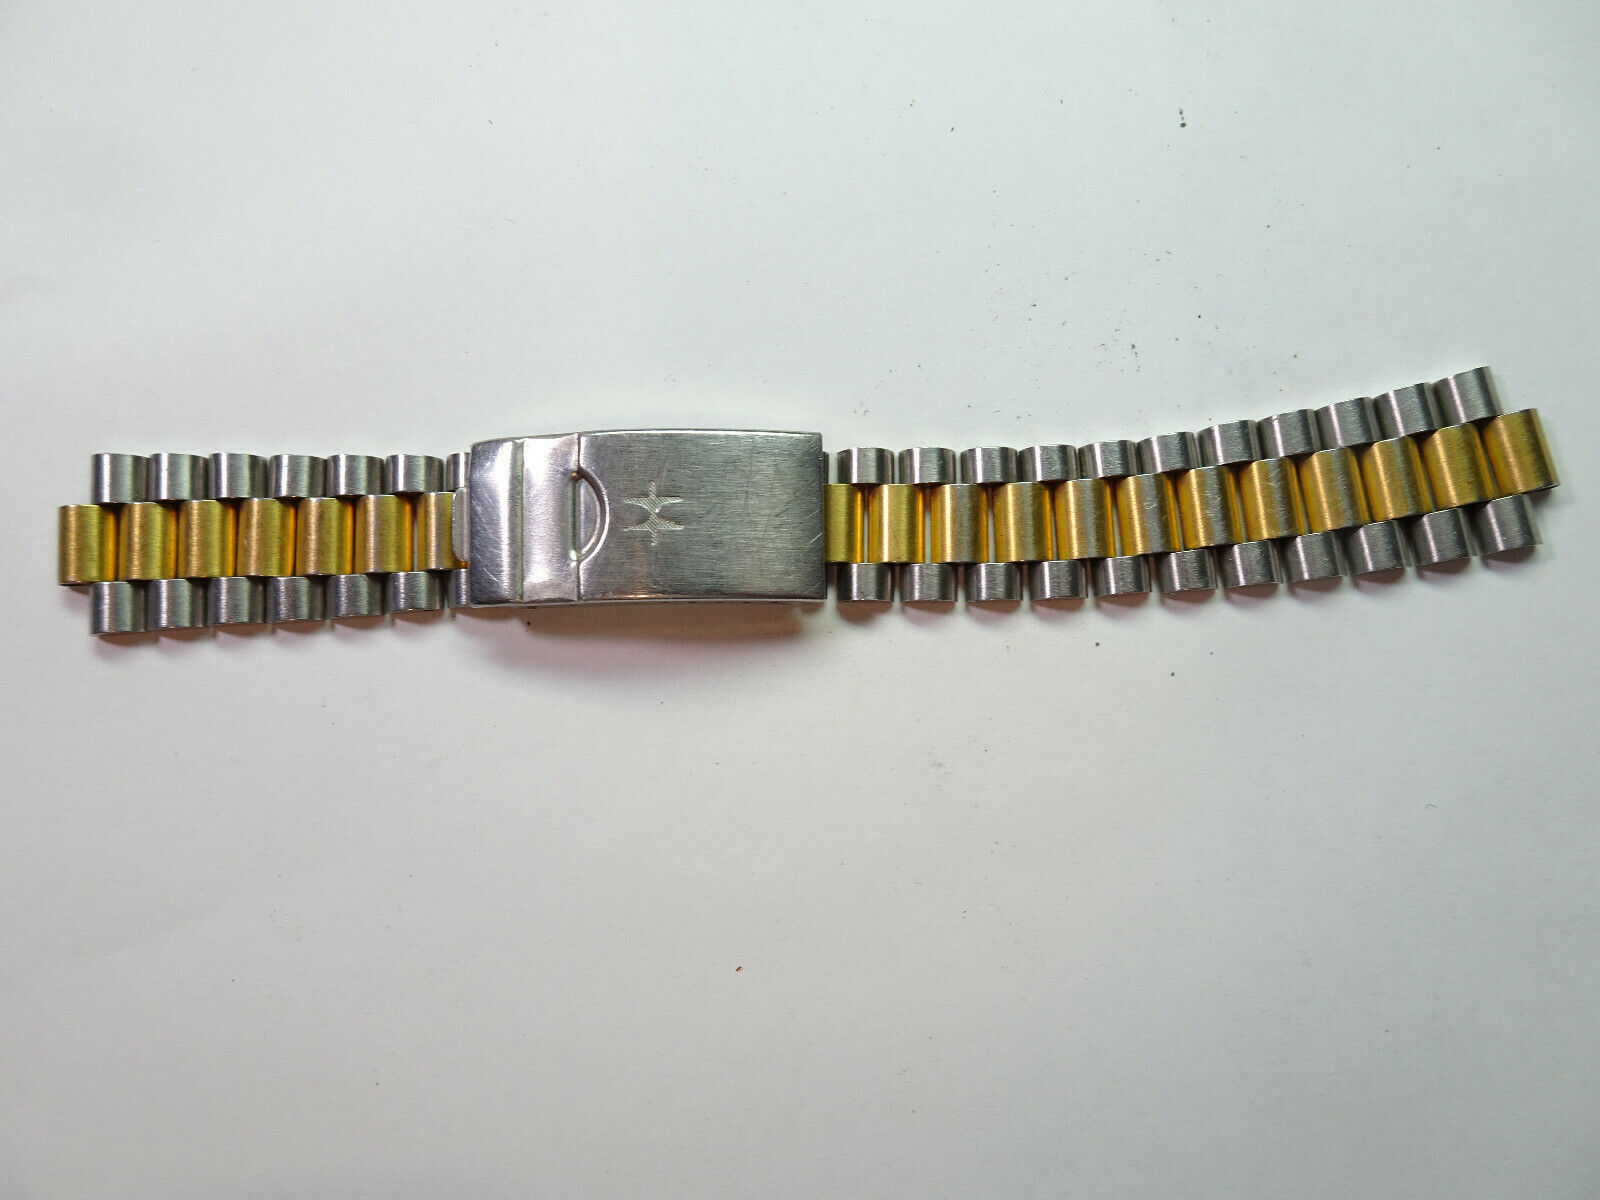 Hamilton double clasp stainless steel two tone watch band missing clasp lock  - $120.94